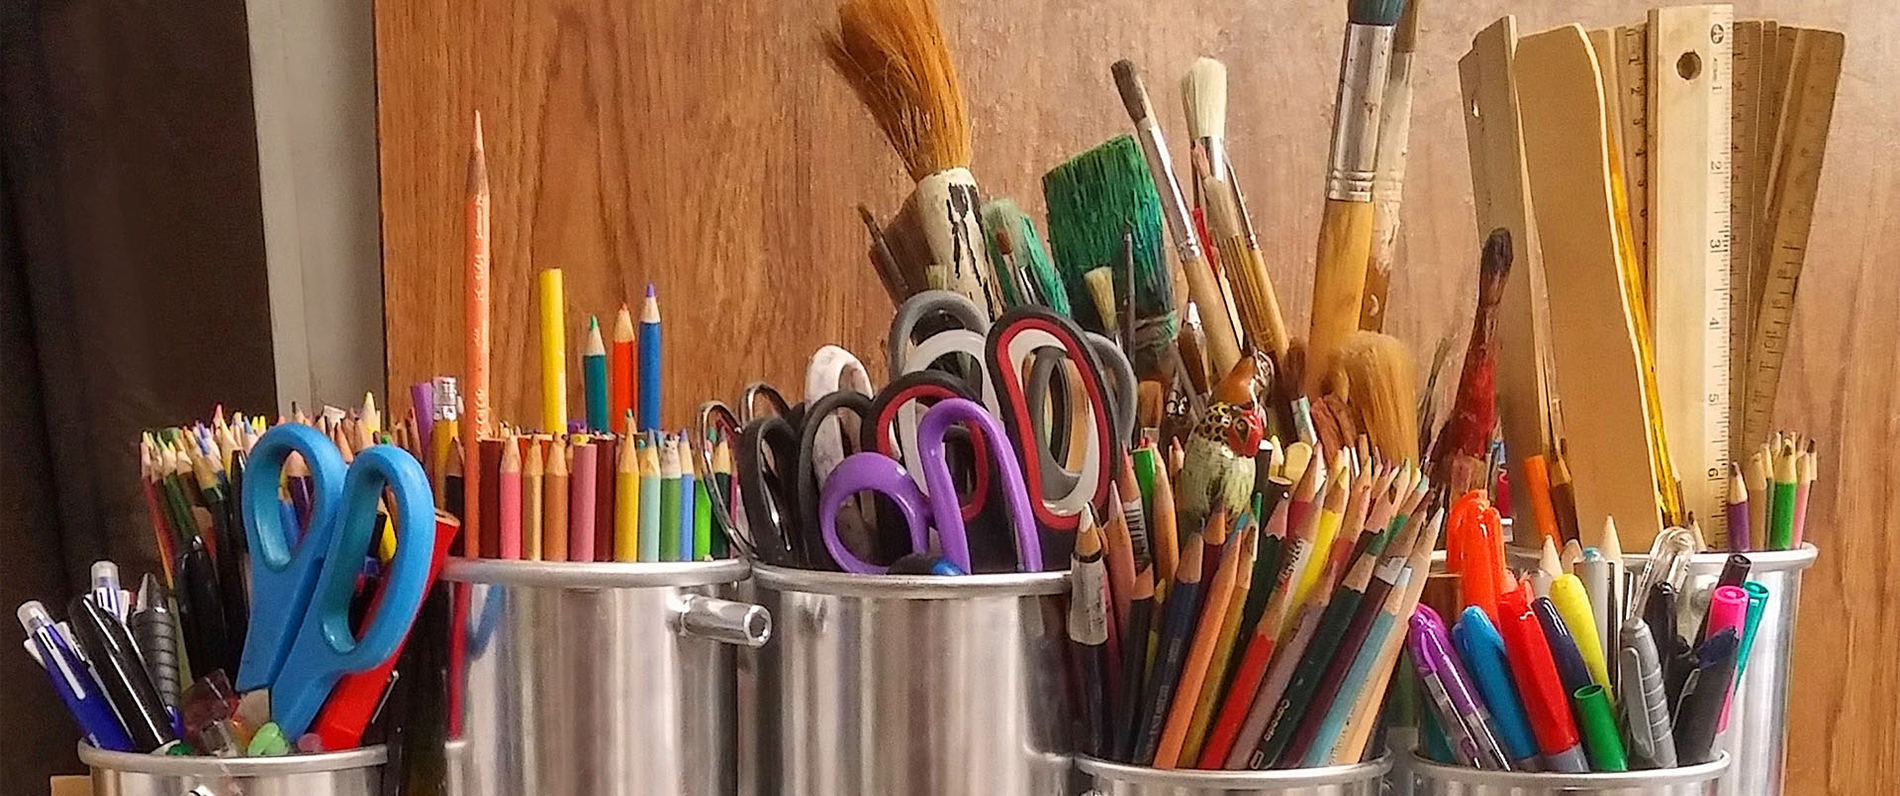 artists work table with brushes, pencils and other tools ready to go for project